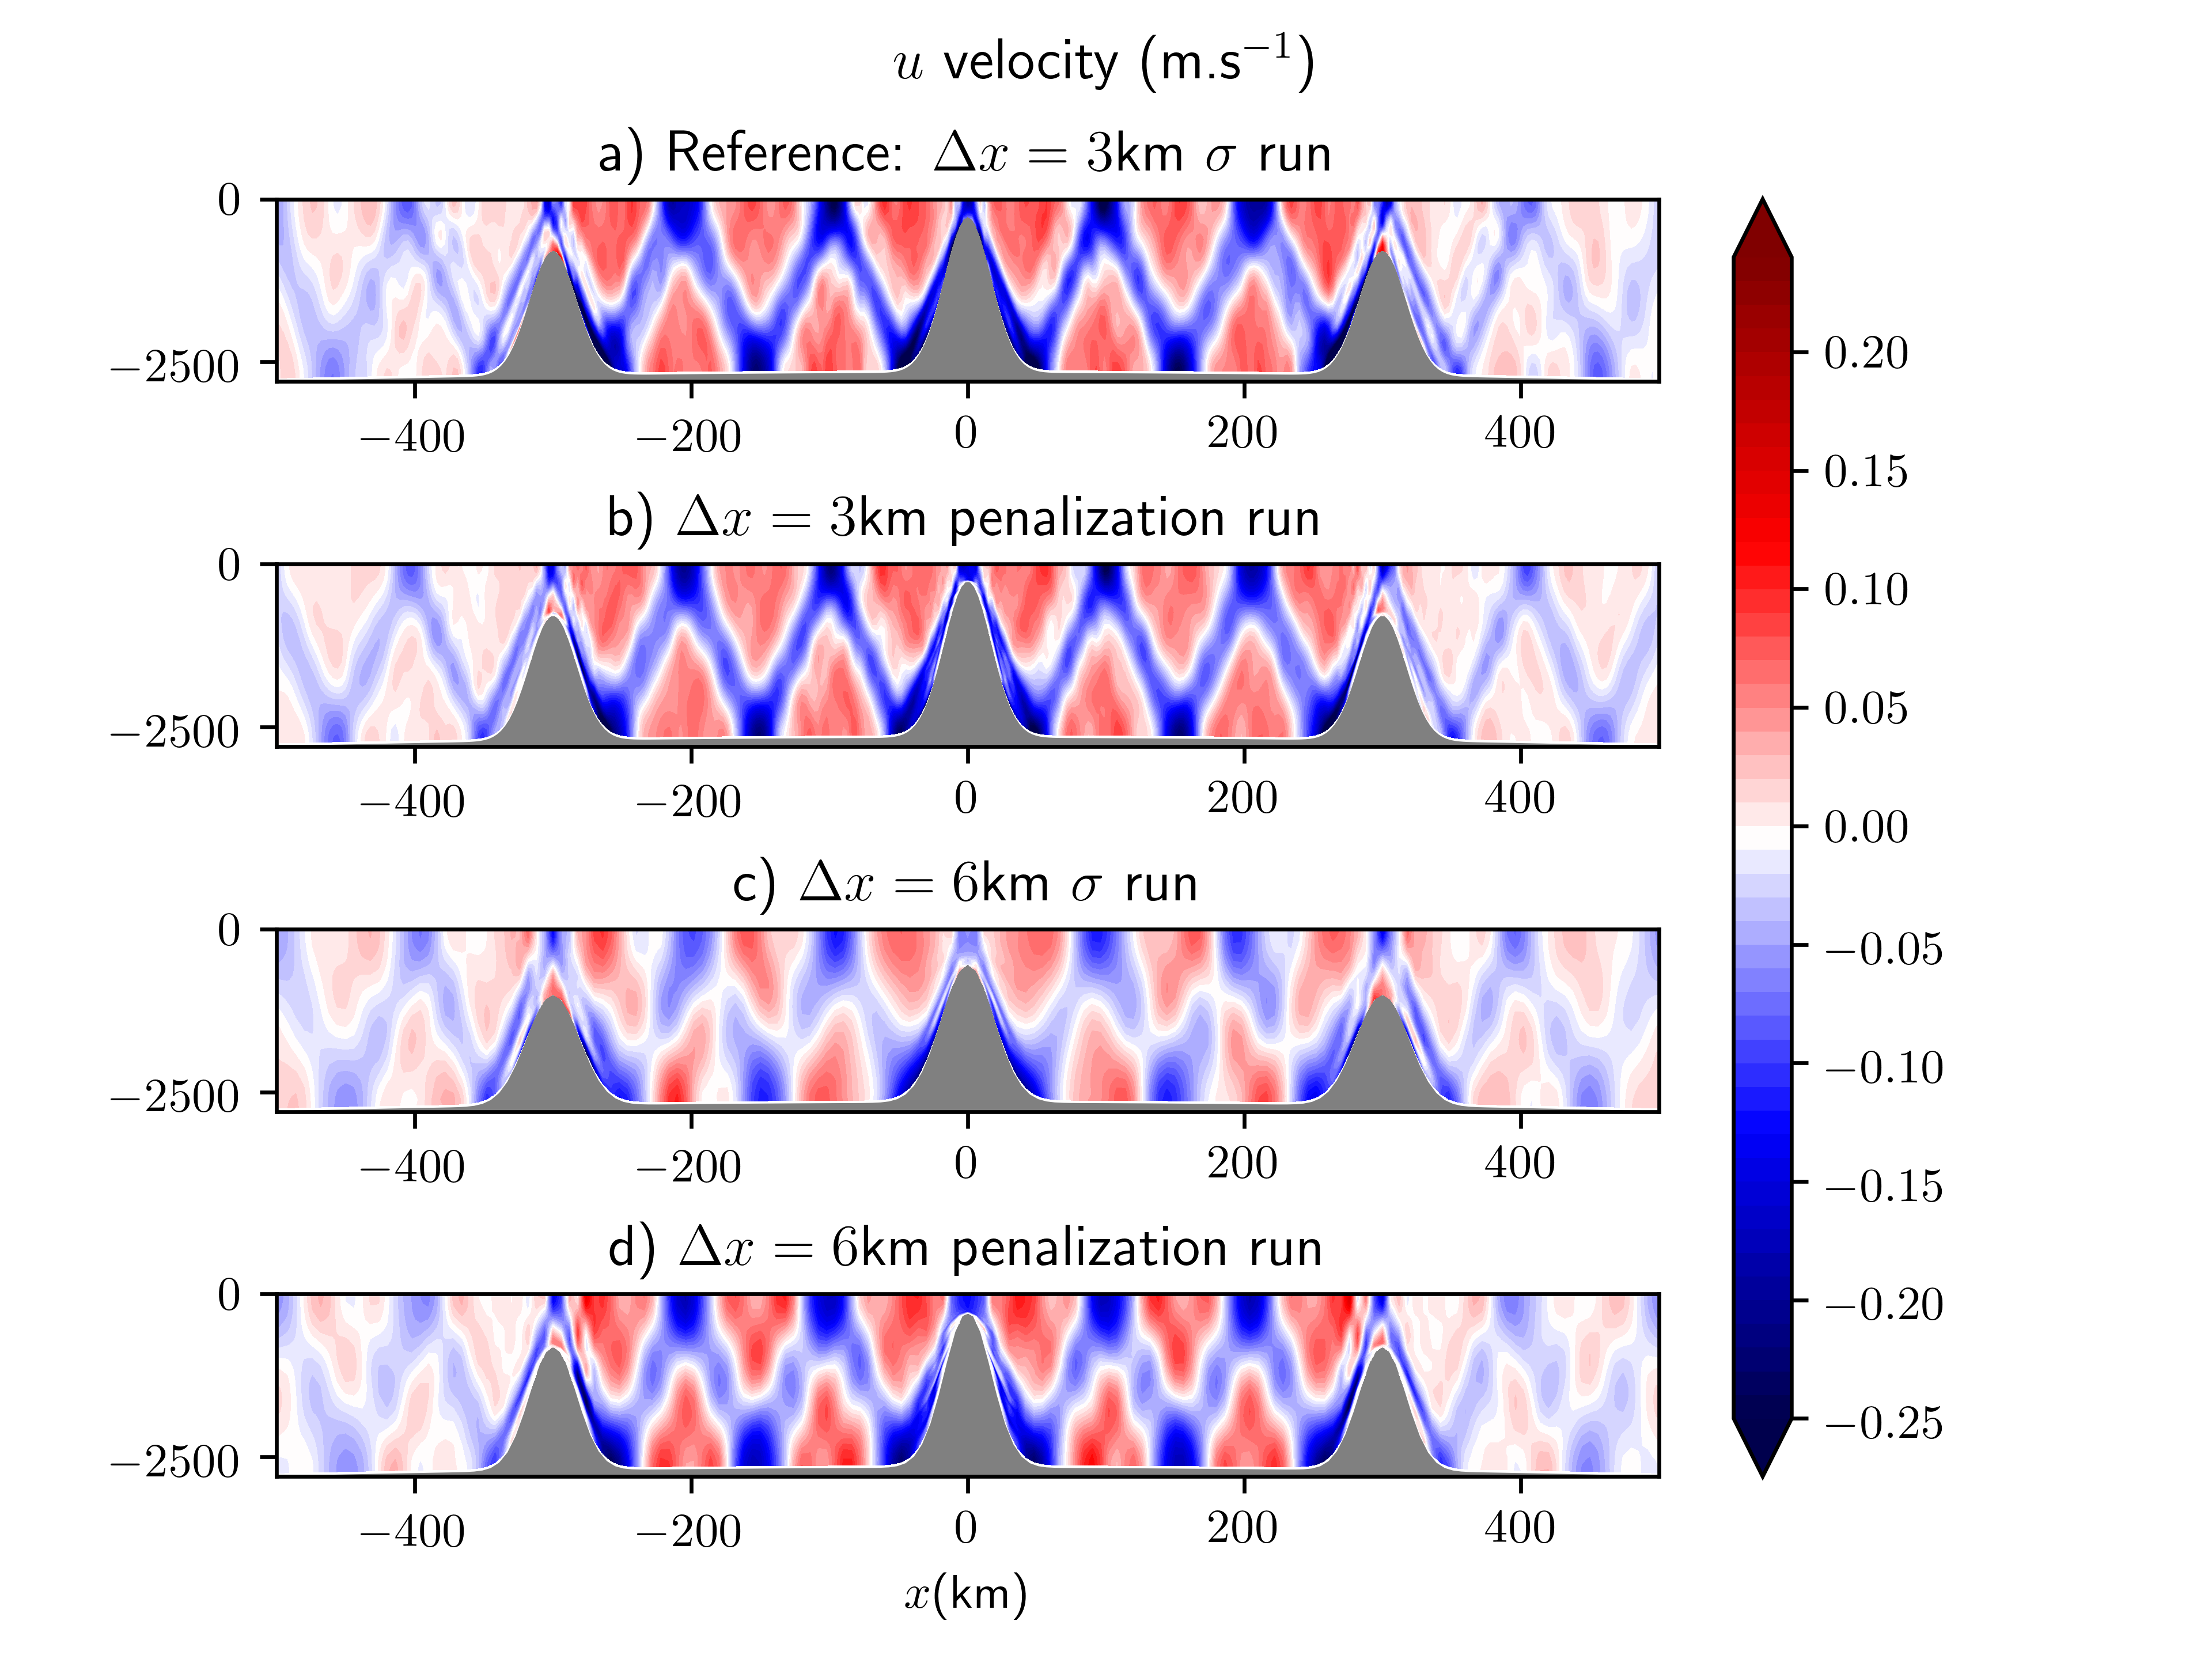 uu velocity. Instantaneous solutions of the internal tide test case after 12 M2 tidal cycles of integration. (a) The reference σ\sigma  coordinate run at 3 km resolution.
(b) The penalized run at 3 km resolution. (c) The σ\sigma -coordinate run at 3 km resolution. (d) The penalized run at 6 km resolution.